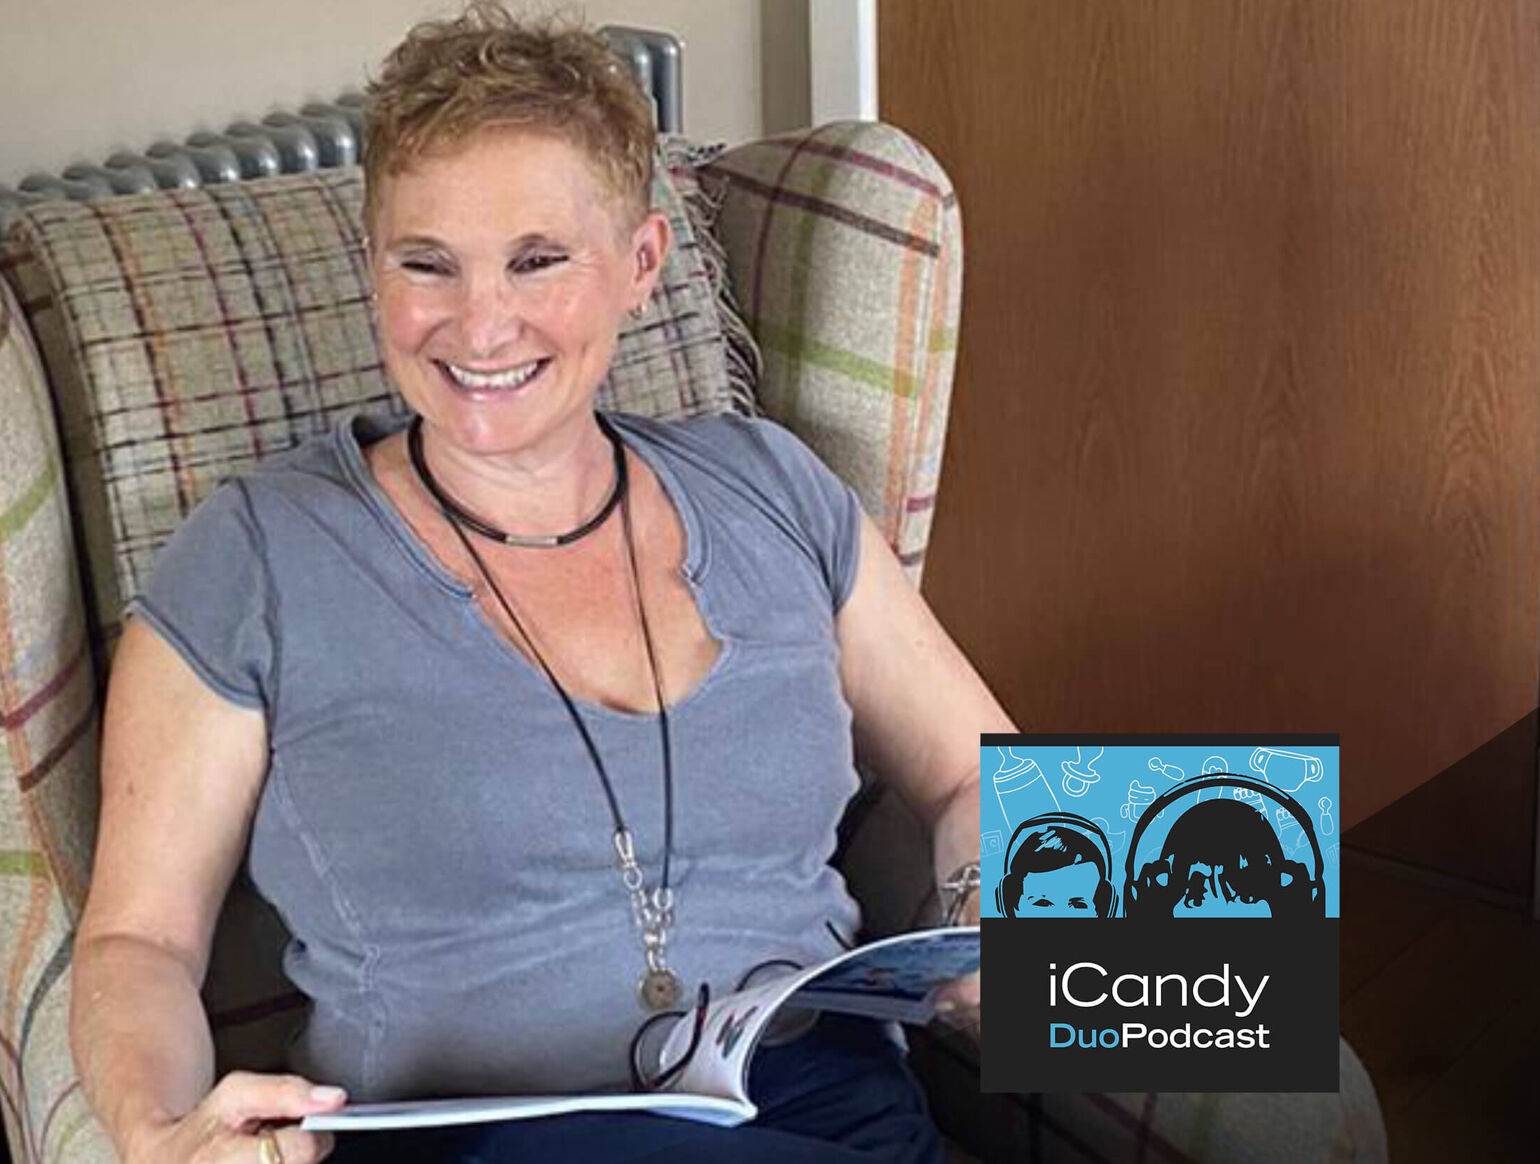 iCandy Duo Podcast - Tracey Green